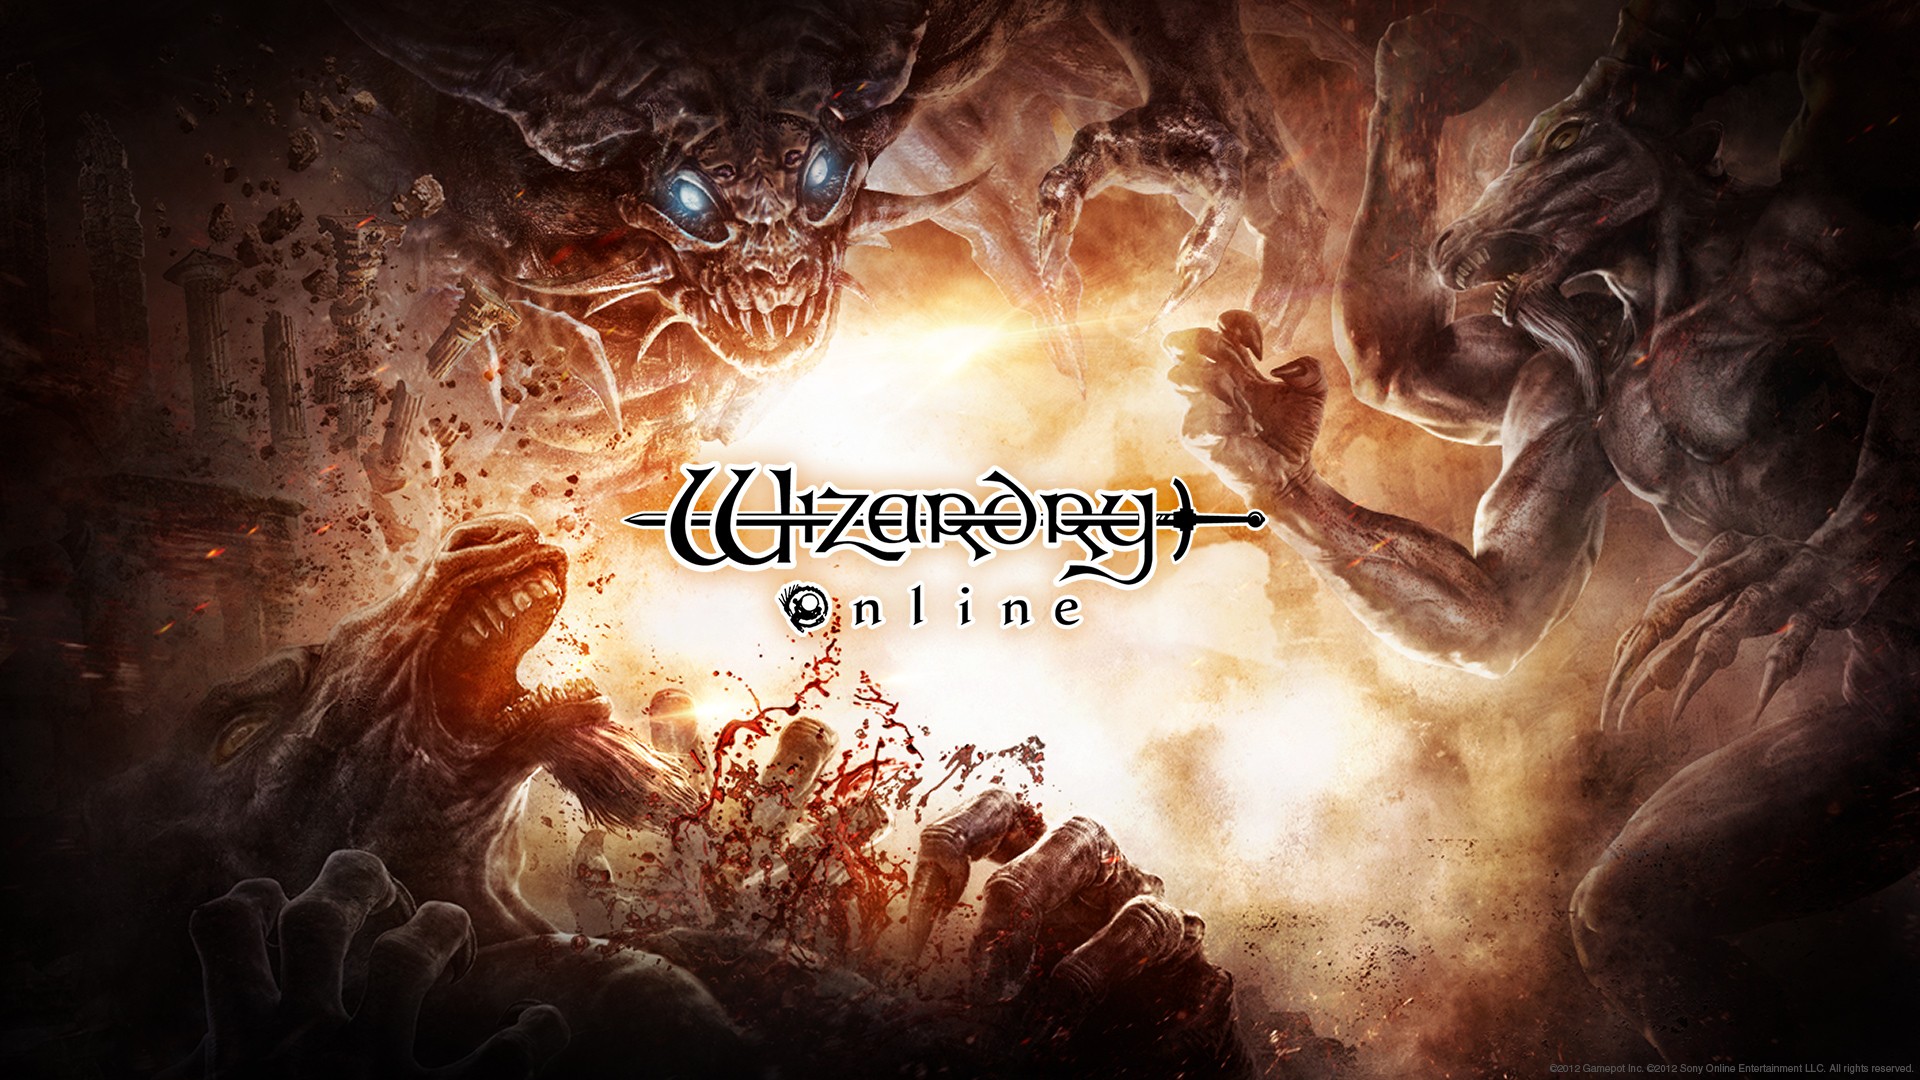 Video Game Wizardry Online HD Wallpaper | Background Image